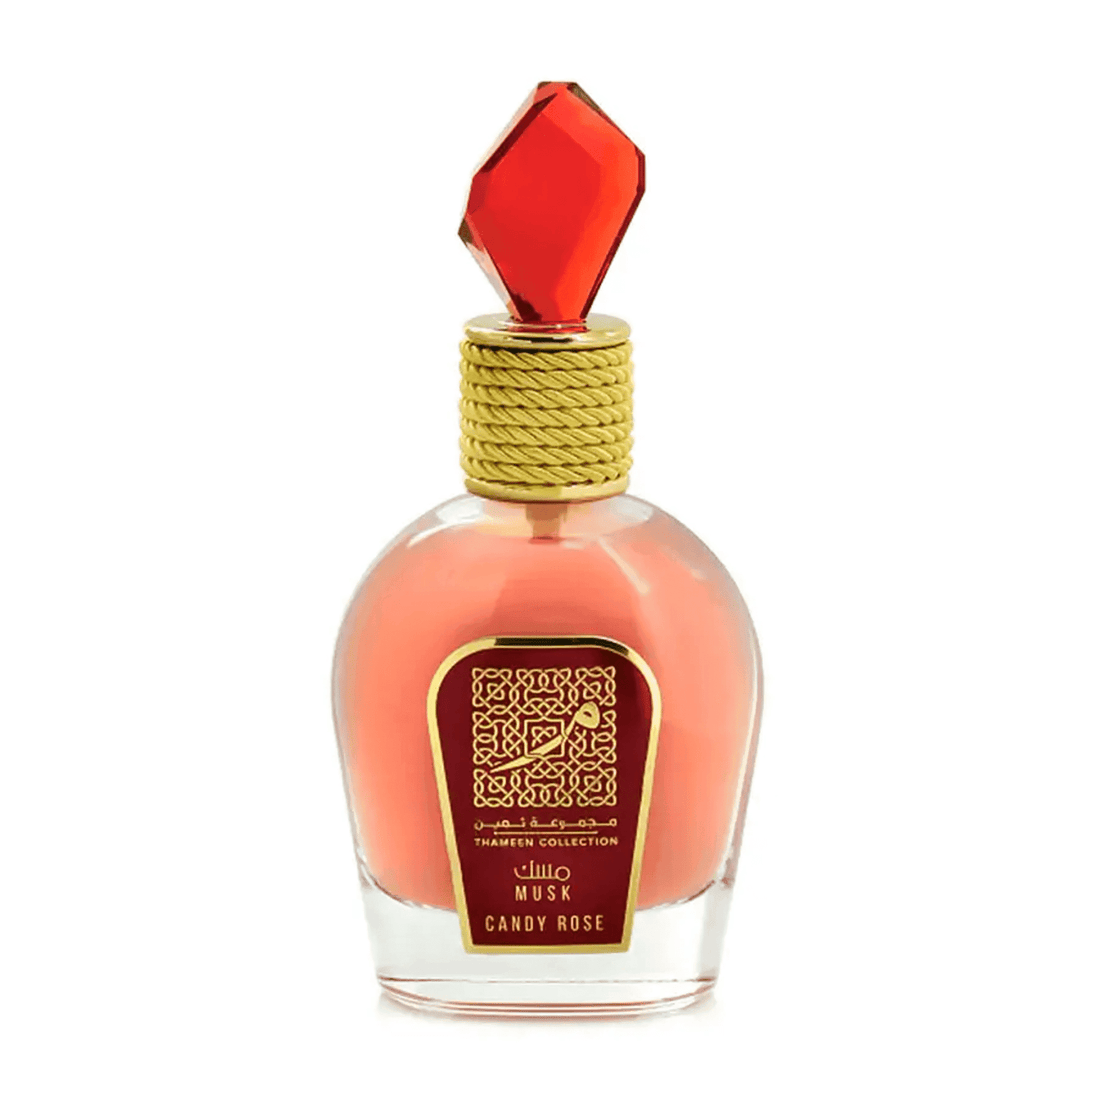 Musk Candy Rose Thameen Collection Perfume 100ml EDP by Lattafa